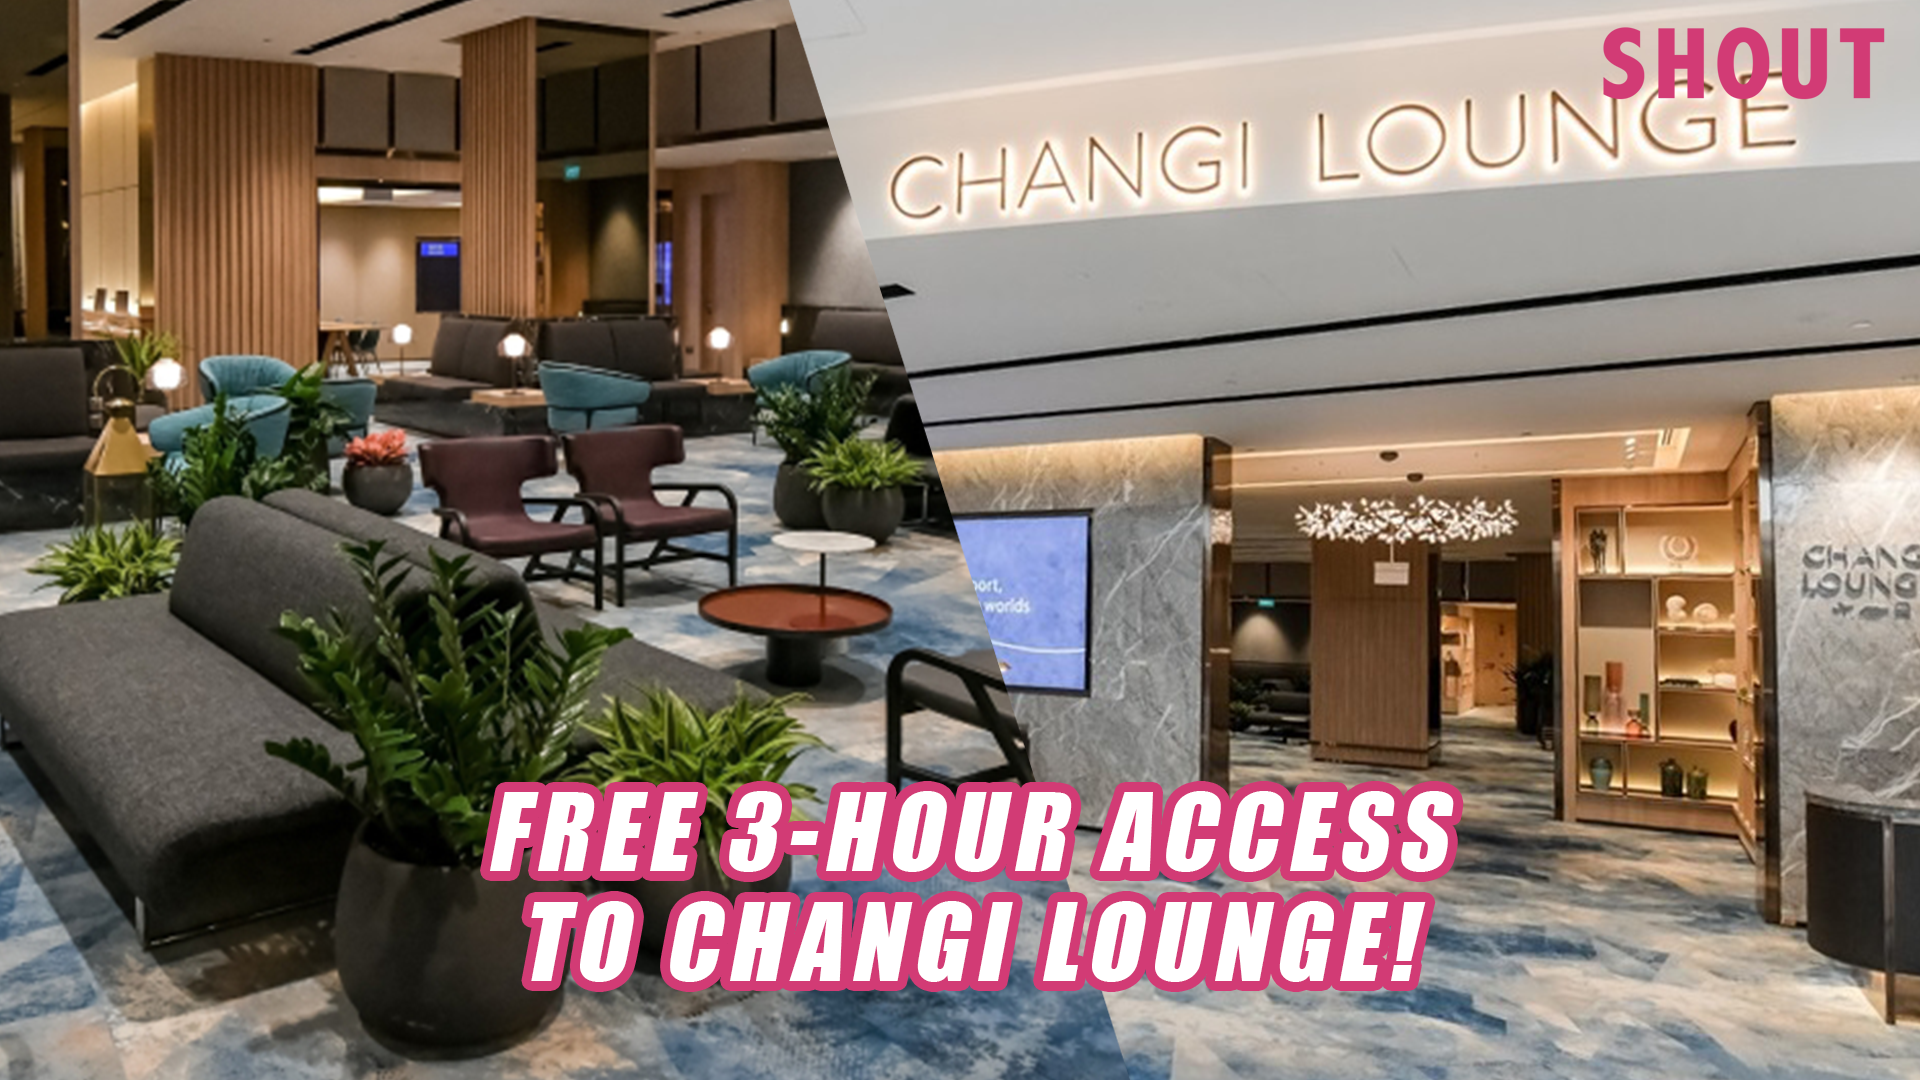 FREE 3-HOUR ACCESS TO CHANGI LOUNGE WITH COMPLIMENTARY WIFI & SNACK BAR ...